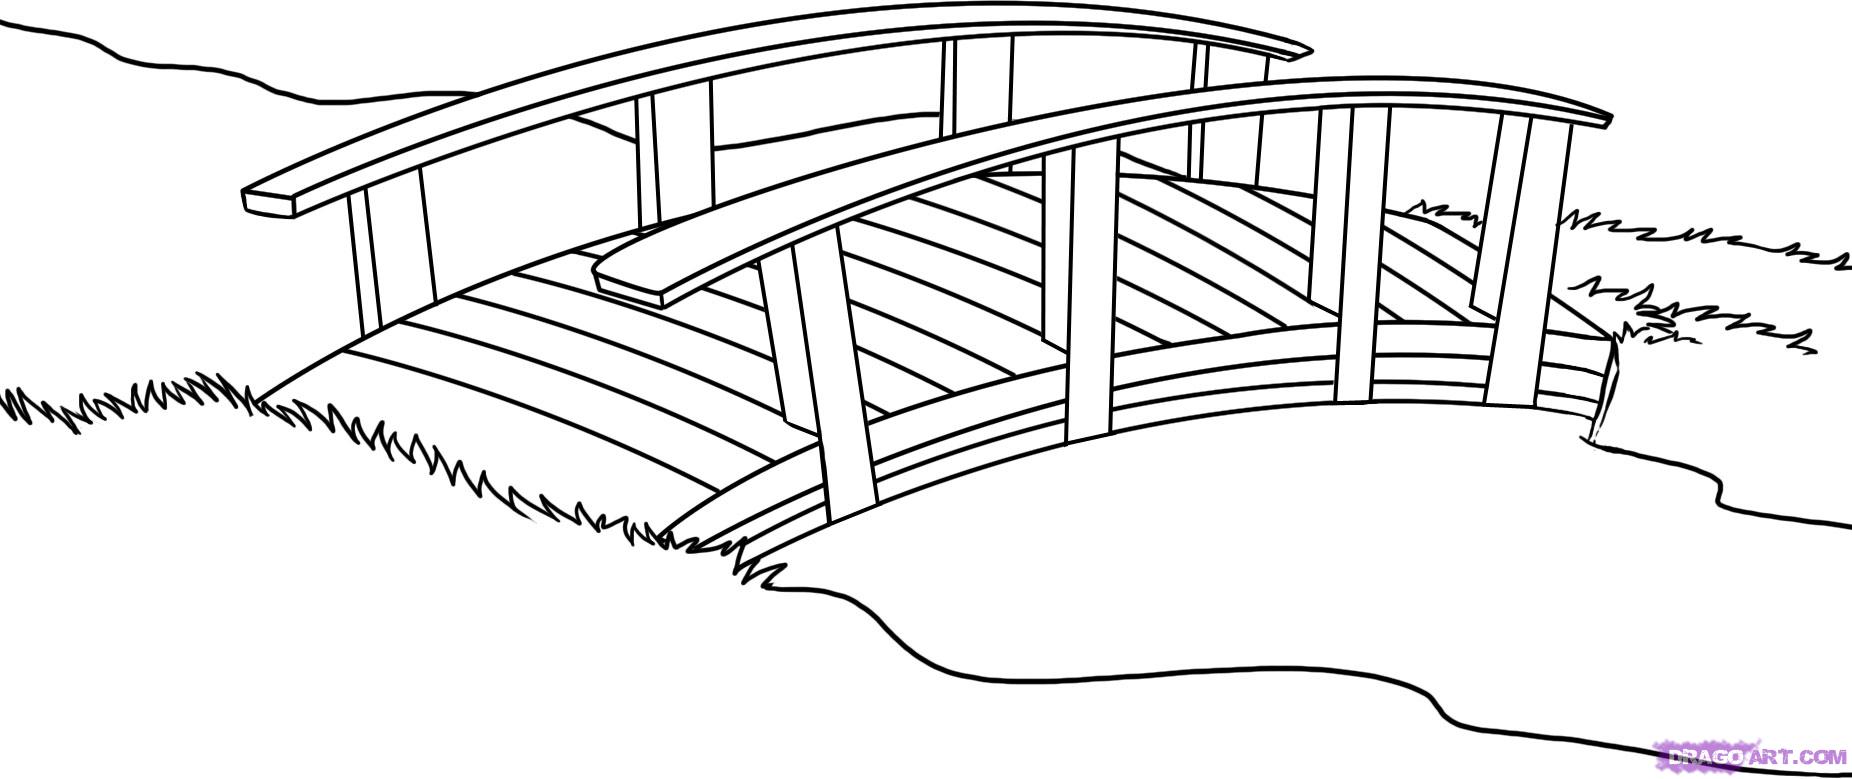 Free coloring pages of brooklyn bridge clip art image 